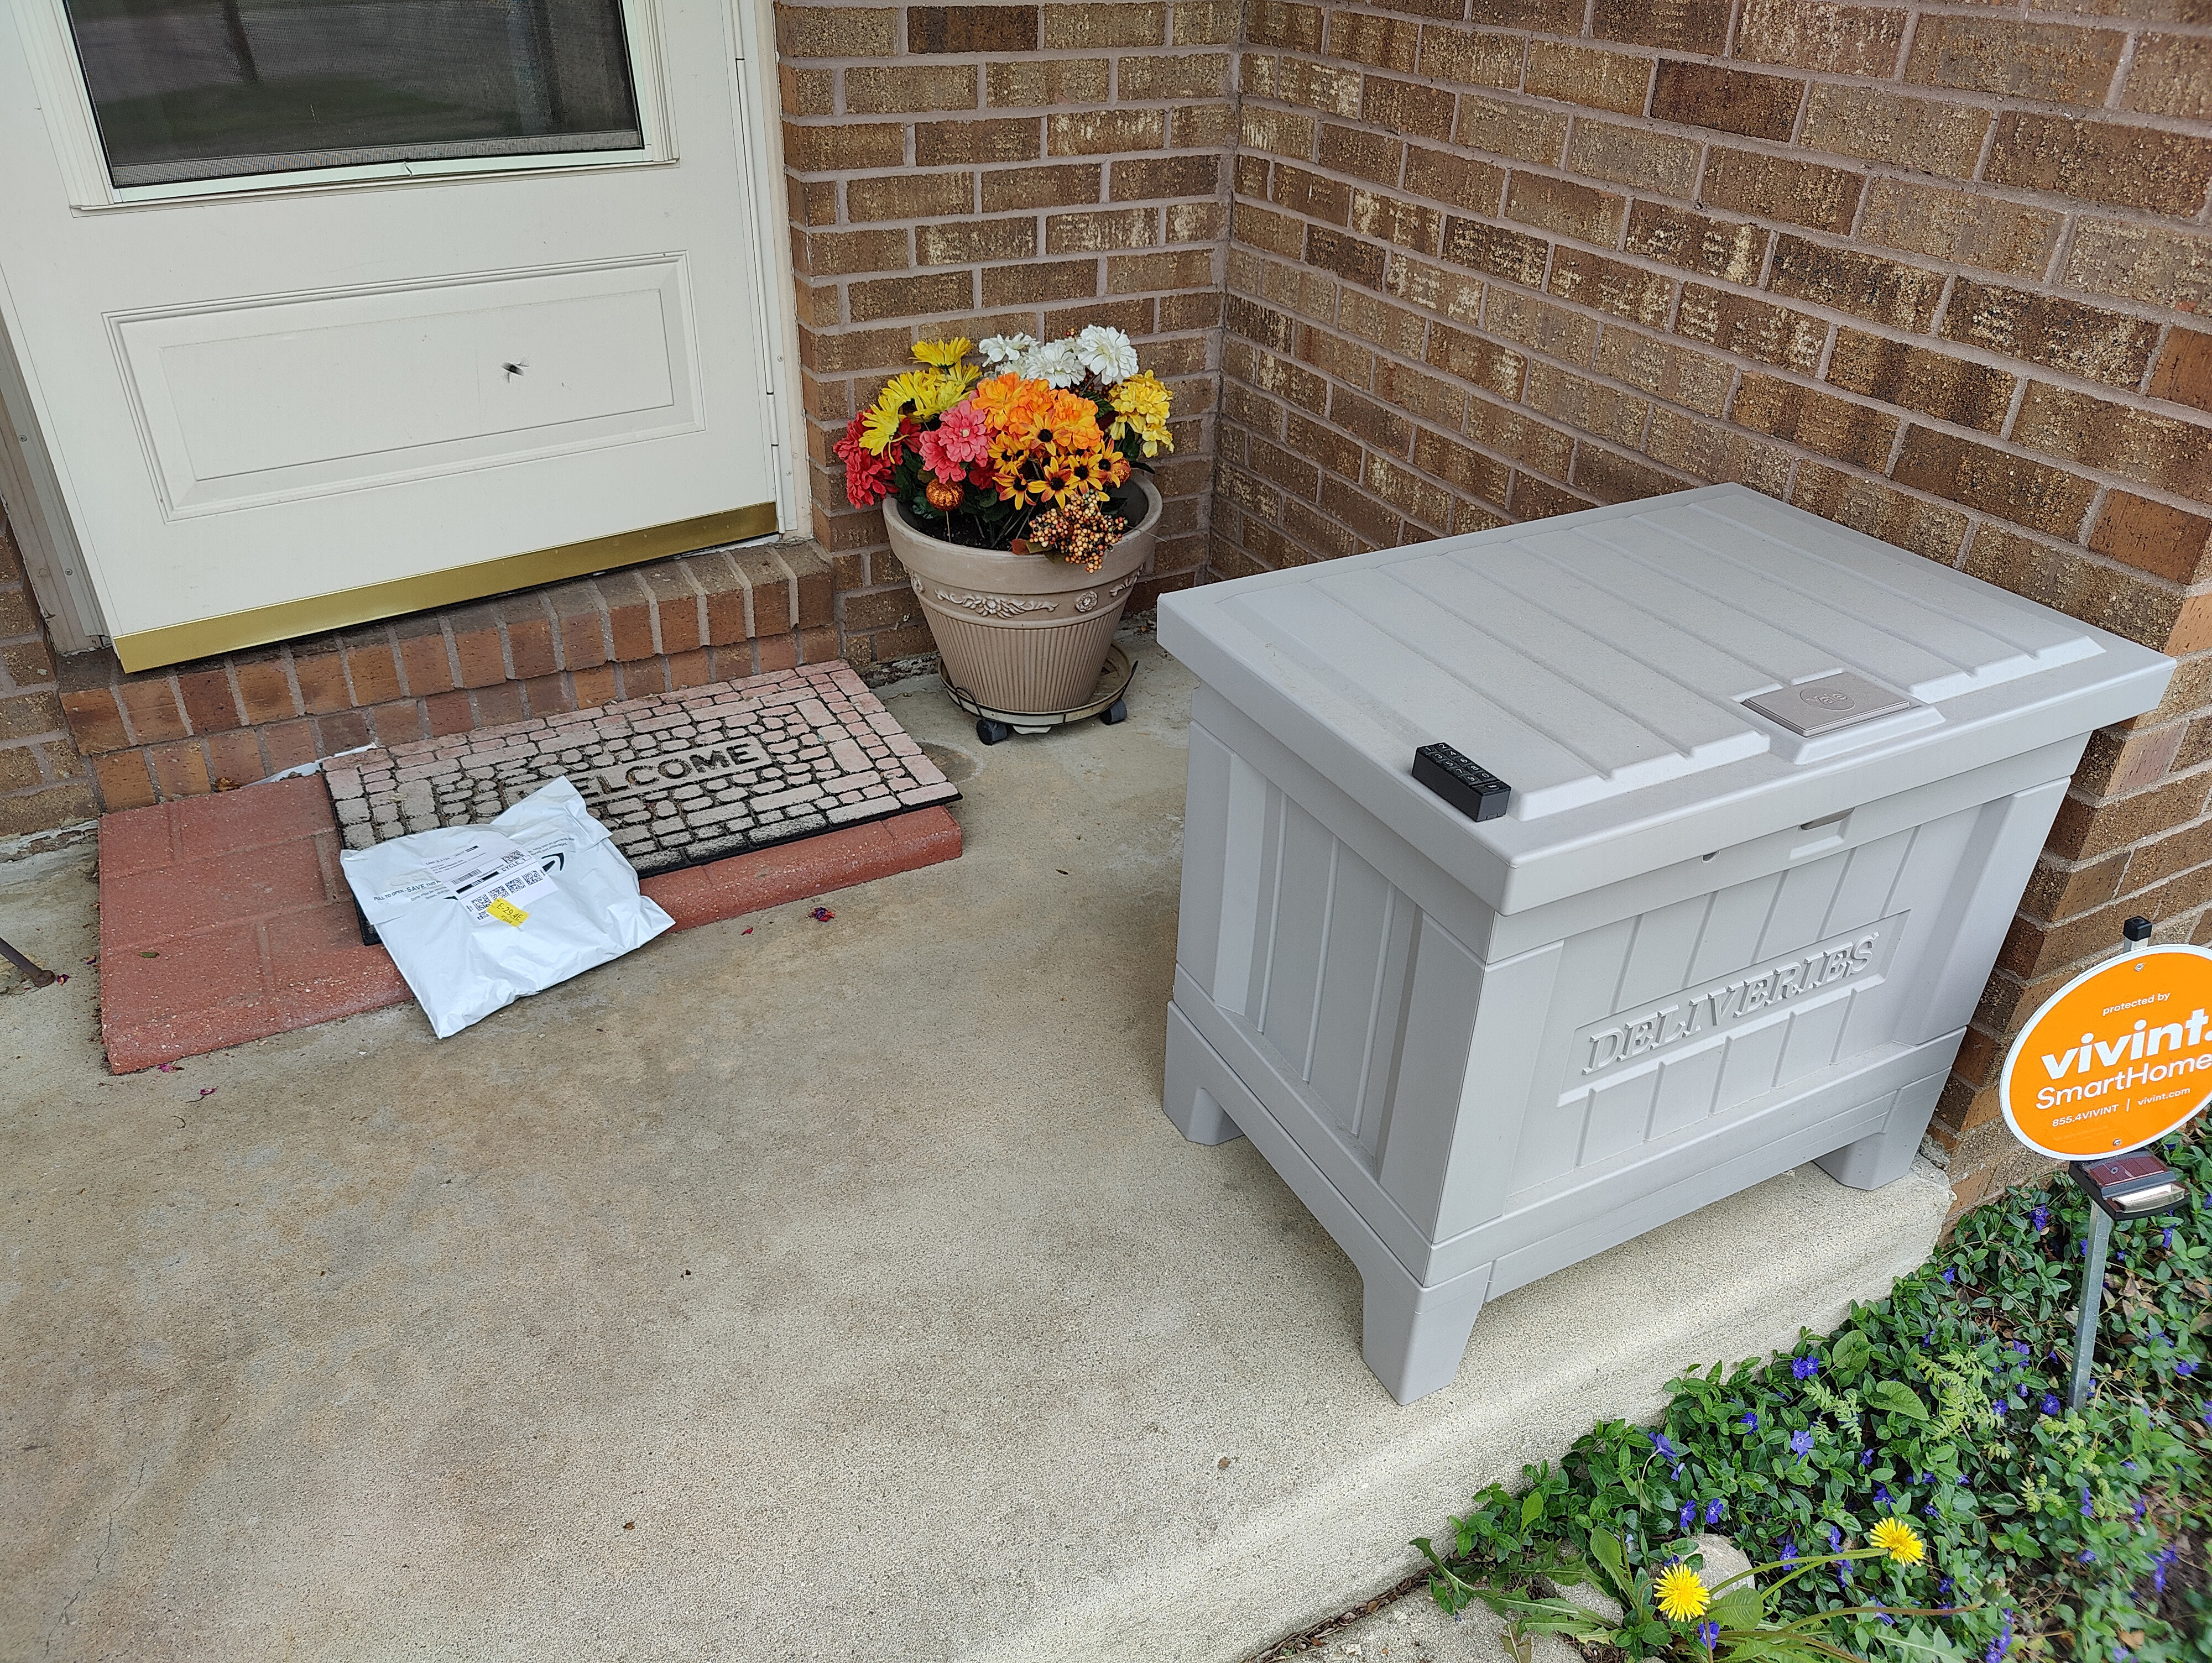 An Amazon package sits on the front porch near the Yale Smart Delivery box,.